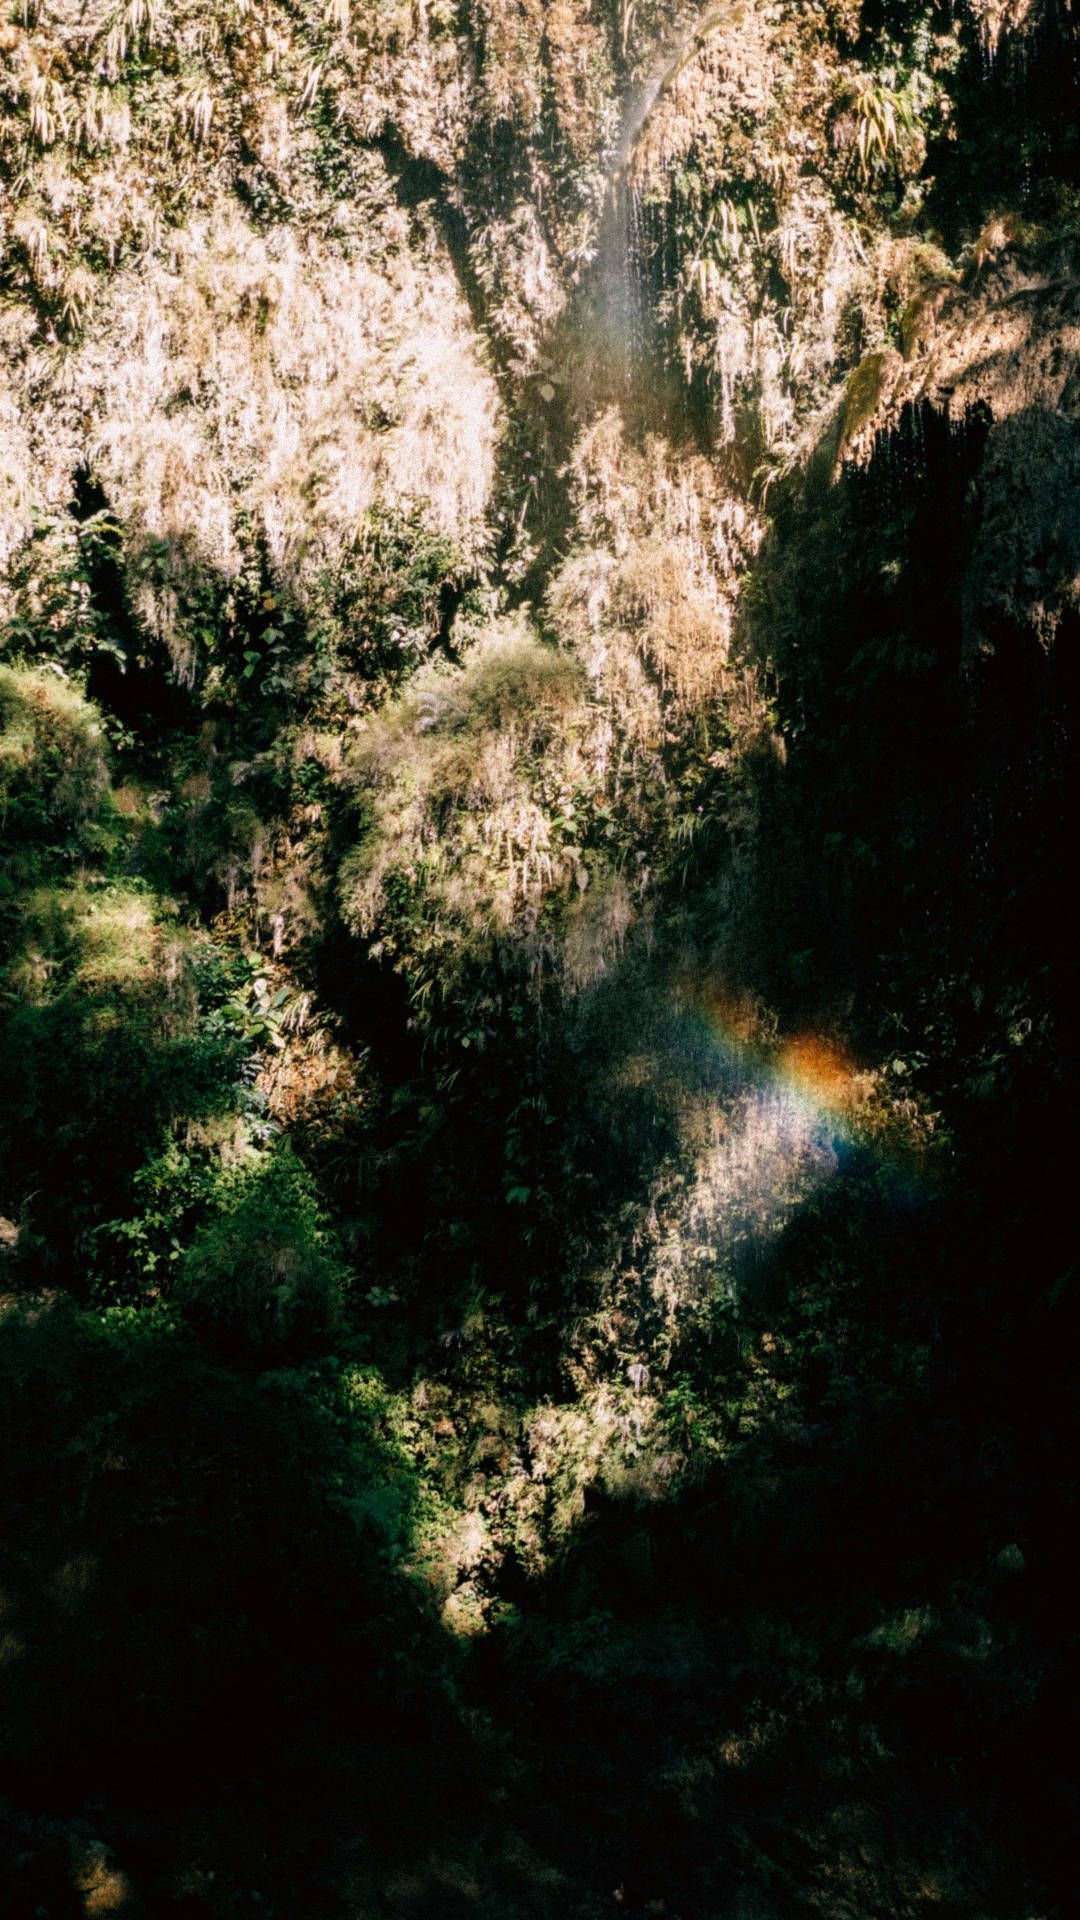 A rainbow shines in the distance in a lush forest. - Jungle